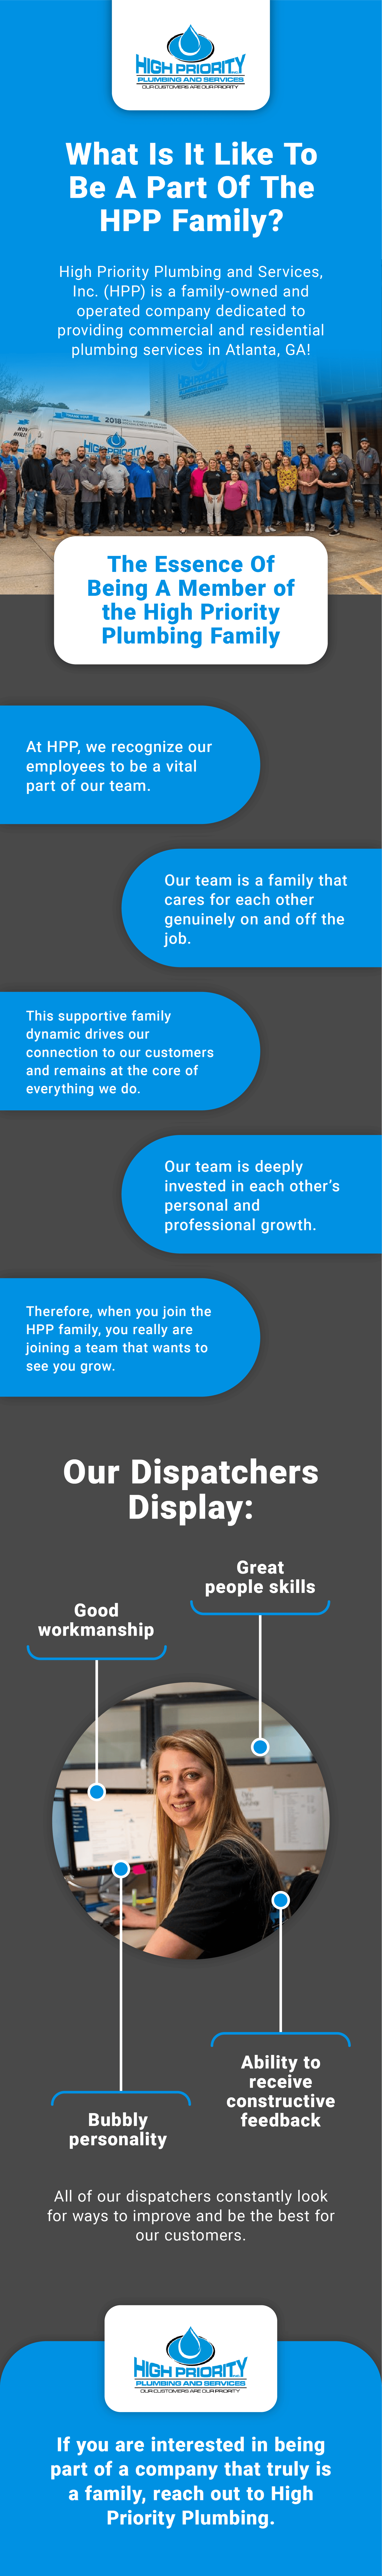 We are Family at High Priority Plumbing